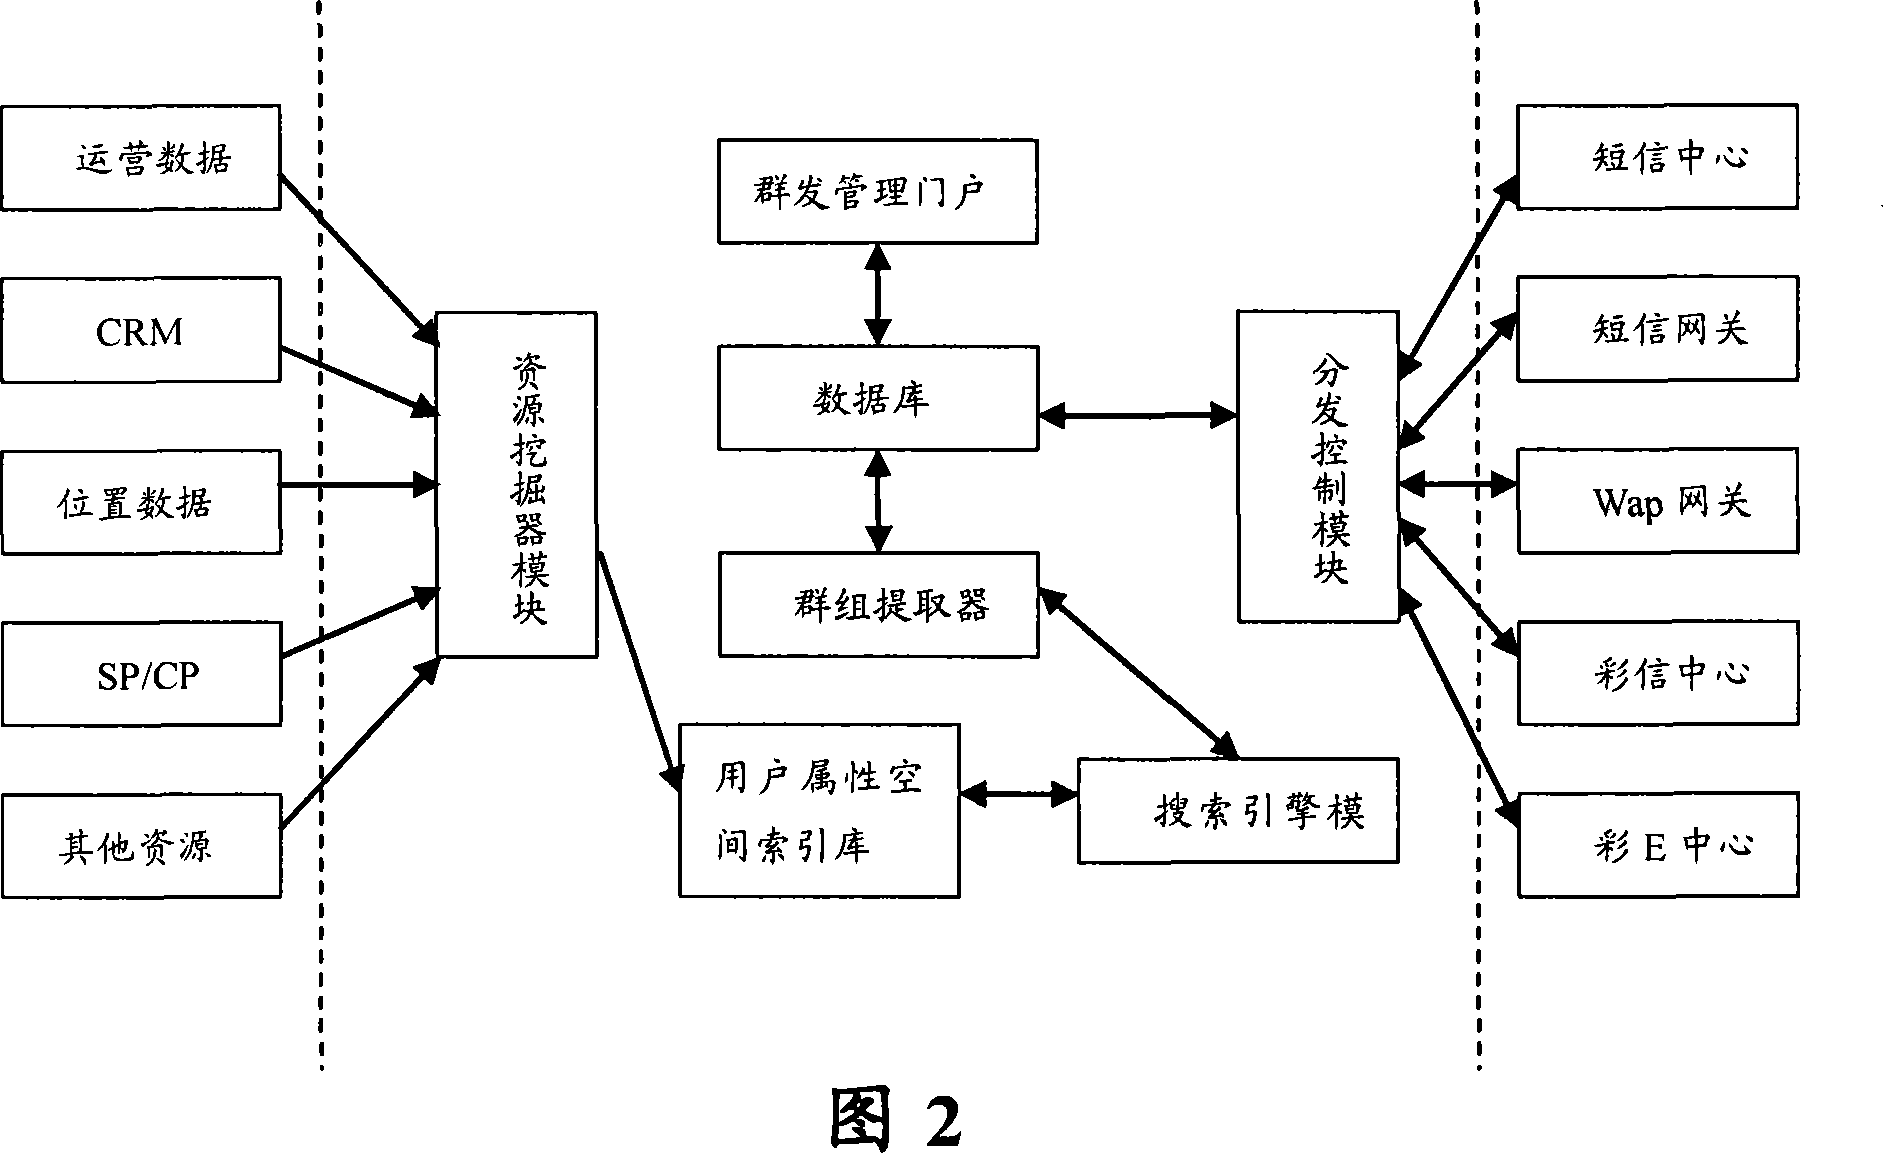 Group transmitting system and method based on search engine